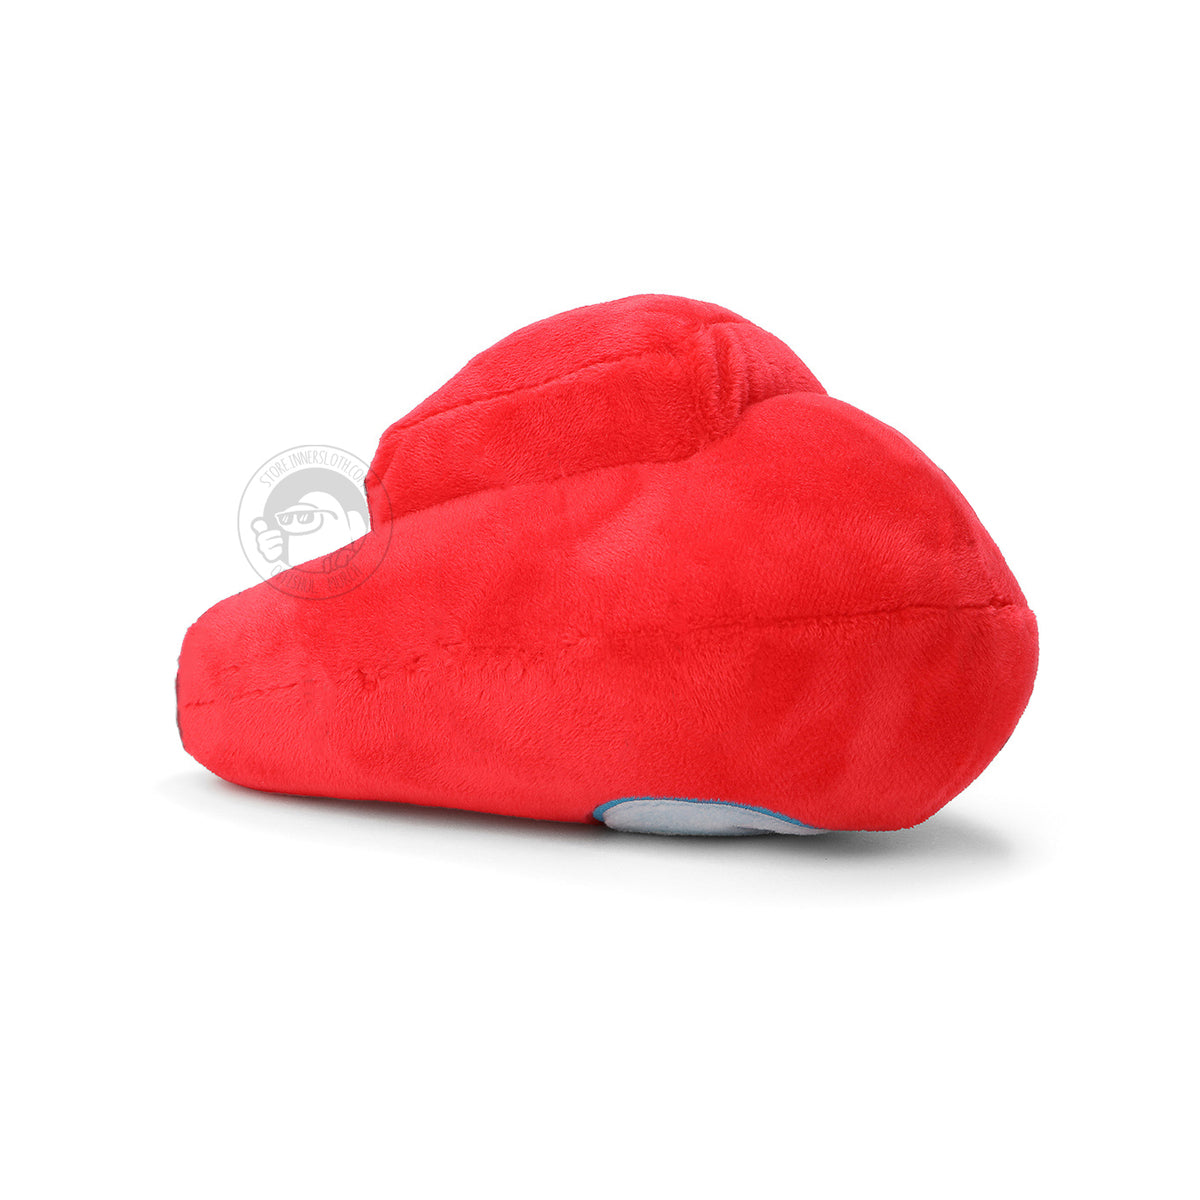 A product photo of the red Among Us: Crewmate Plush by Frisk Wolfie flat on its face.